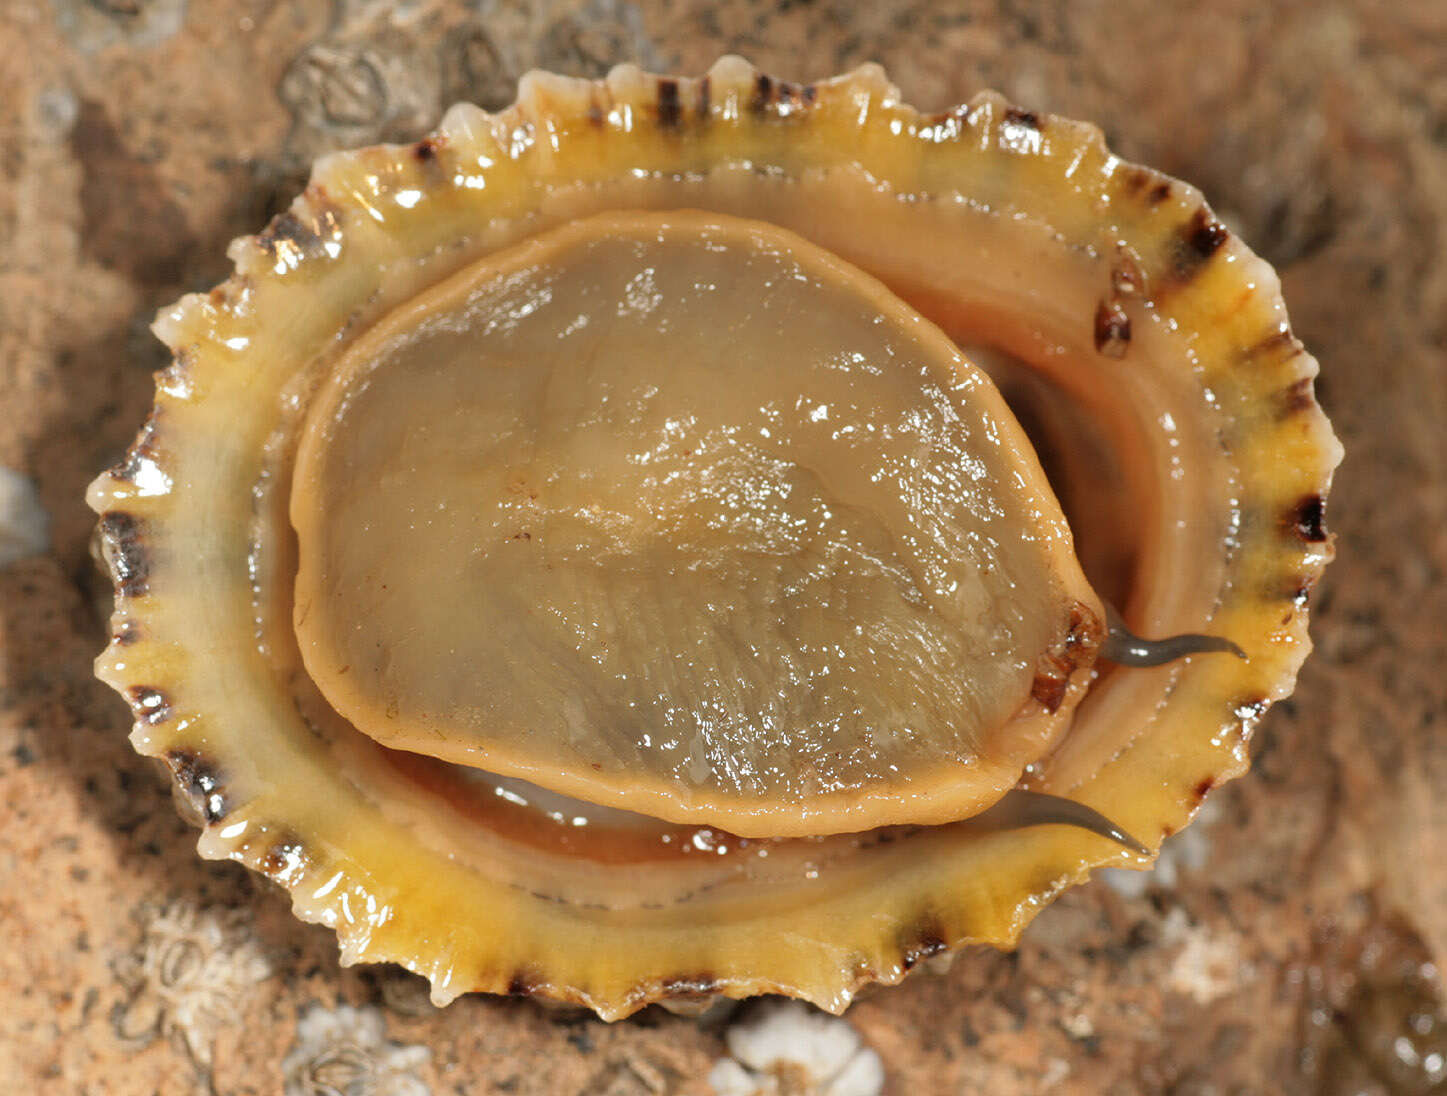 Image of Common limpet